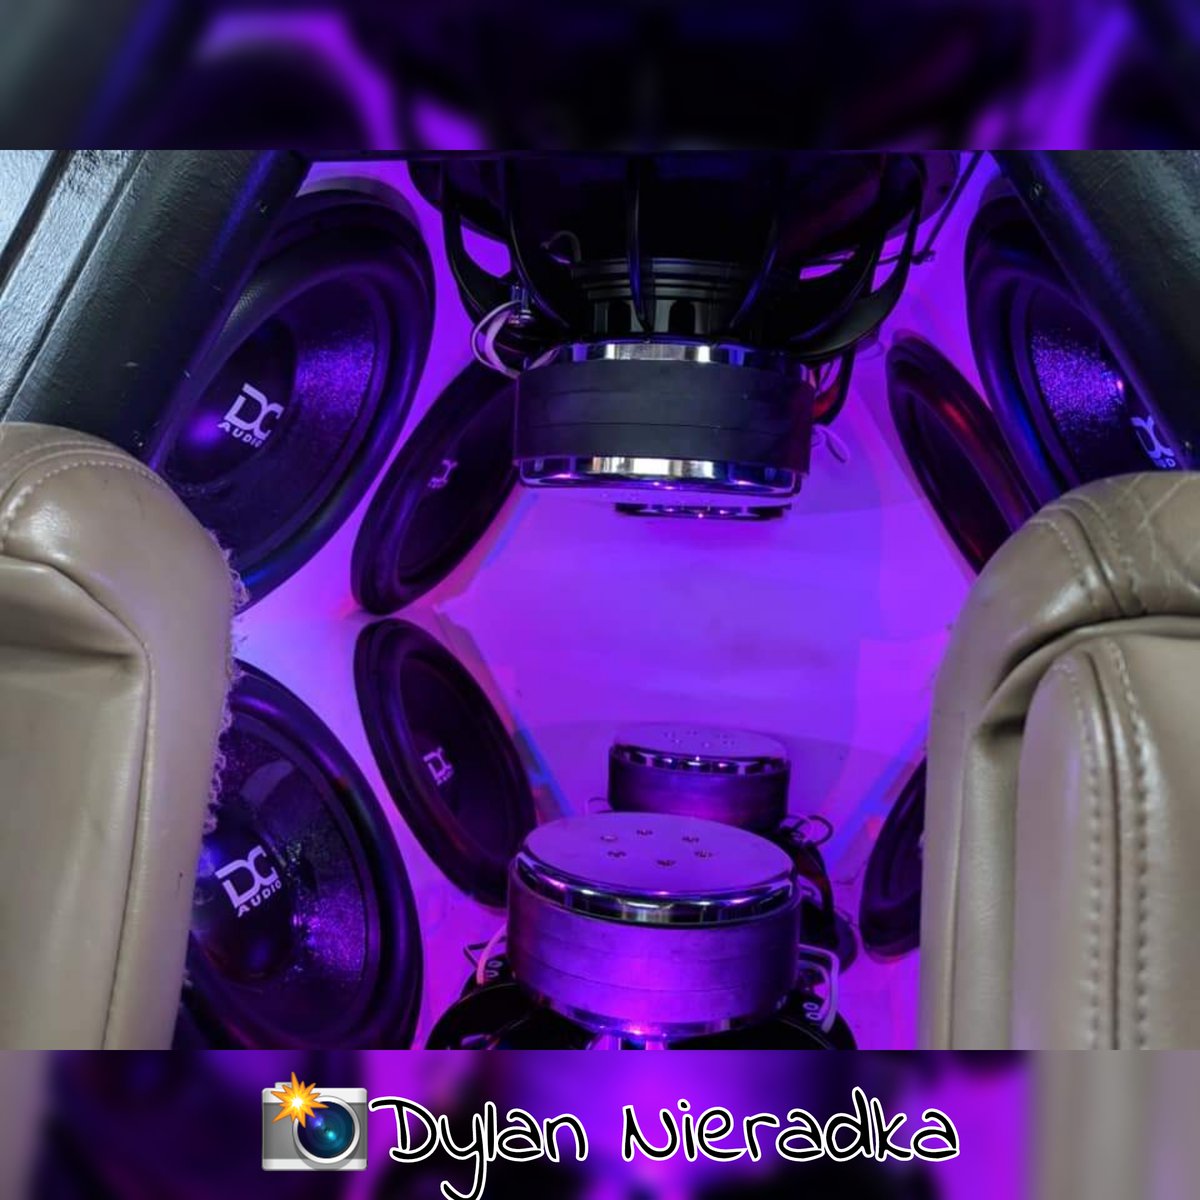 🫶🔊🎶😎Surround yourself with love! #Bass is #love, #DCaudio is bass and #love! It all makes sense.  Stop by #XplicitAudio today for the best deals on the best bass.

🛒Shop #caraudio - bit.ly/3z0KDgO

#12voltmag #prvaudio #12volt #caraudioaddicts #subwoofers